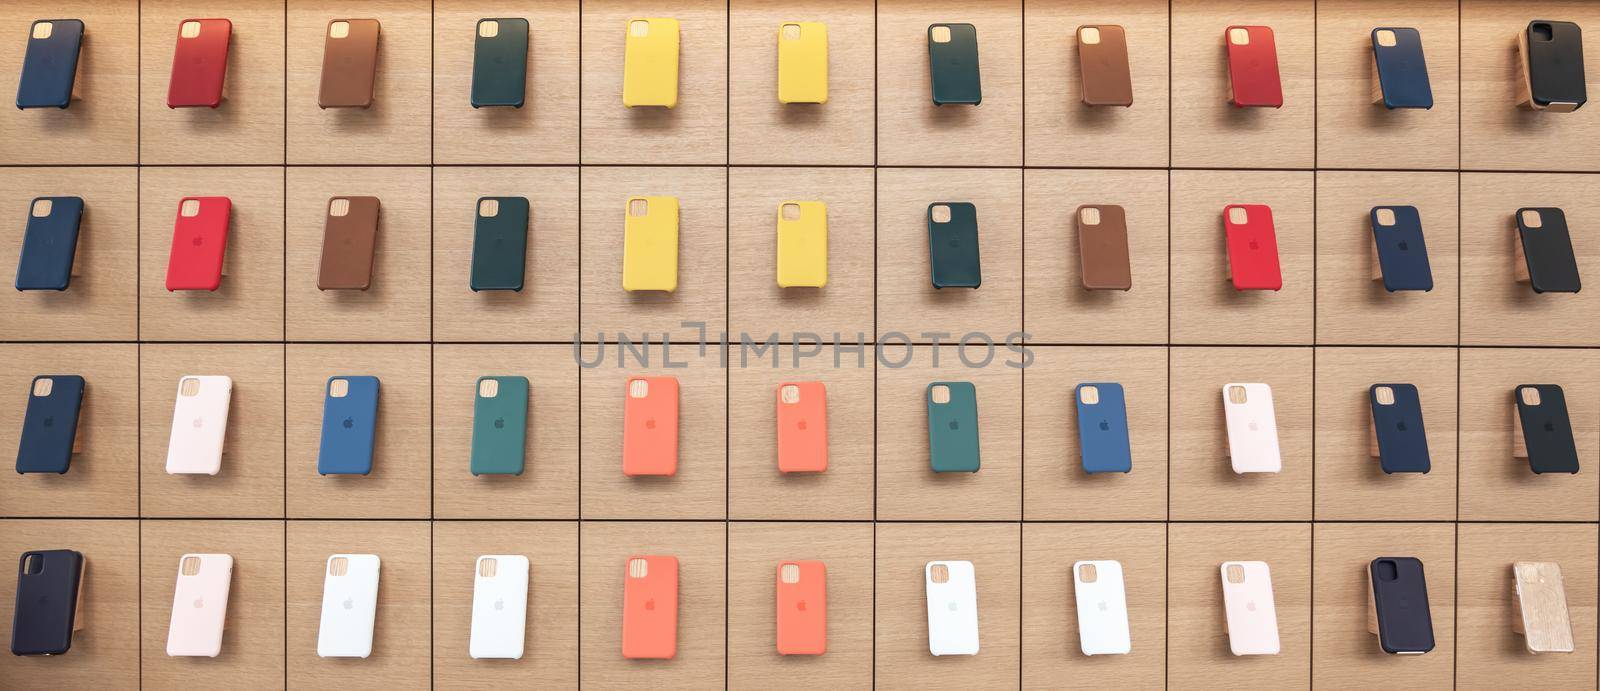 AVENTURA, FLORIDA, USA - SEPTEMBER 20, 2019: Apple iphone 11 series protection cases hanging on the wall in Apple store in Aventura Mall by Mariakray